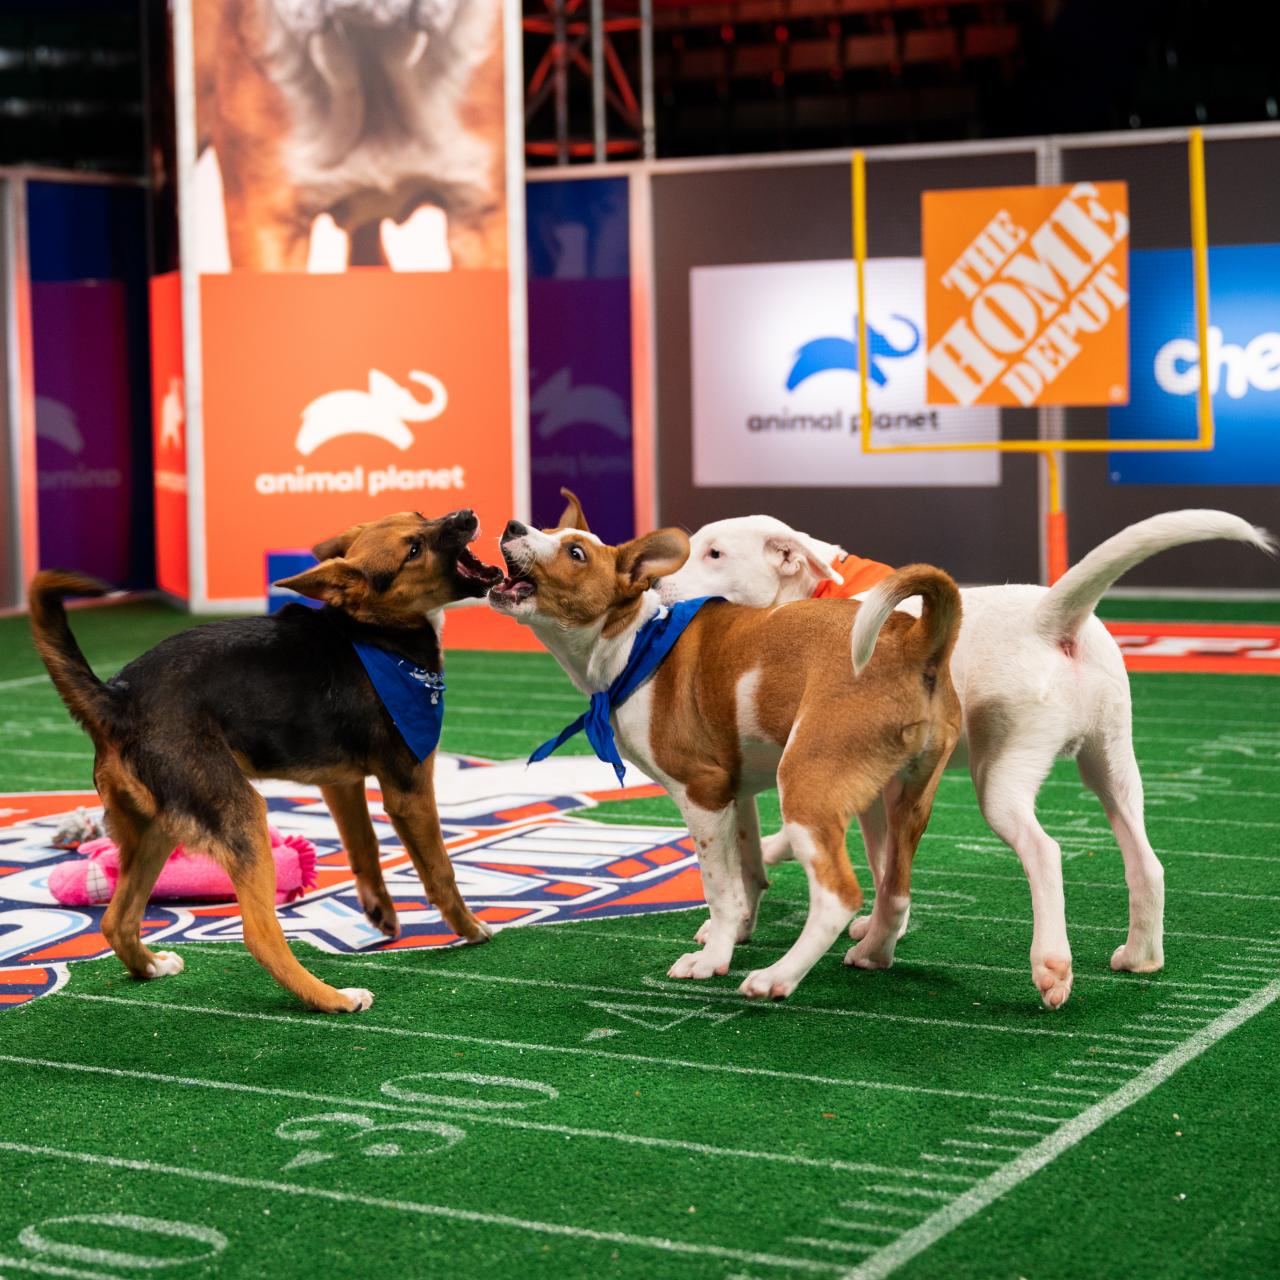 How to watch and stream Puppy Bowl Presents: The Dog Games - 2021 on Roku